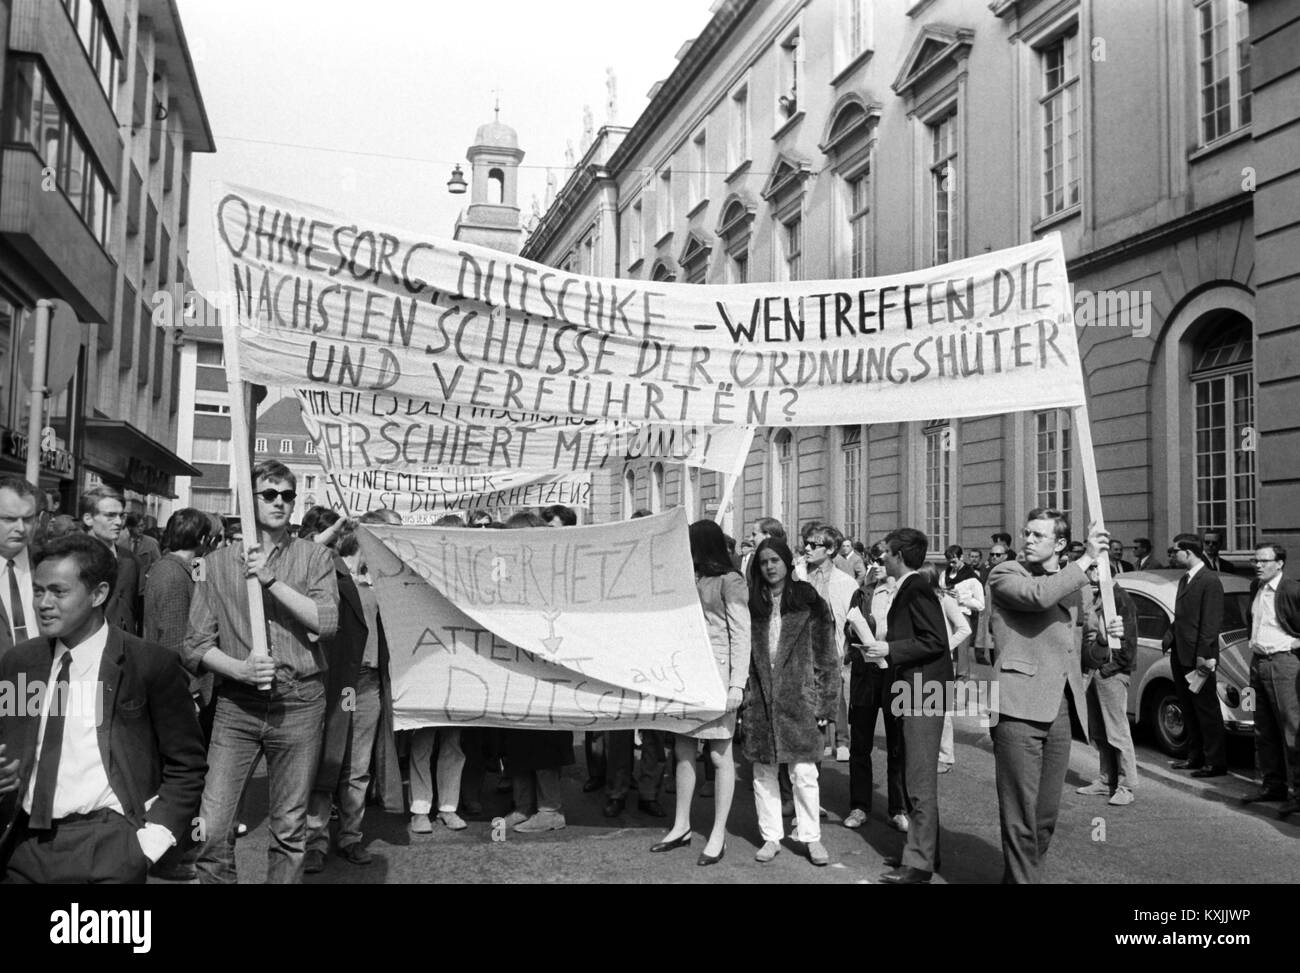 Students demonstrate after the attempted assassination on Rudi Dutschke (on 11 April 1968 in Berlin) against Springer media on 16 April 1968 in Bonn. | usage worldwide Stock Photo